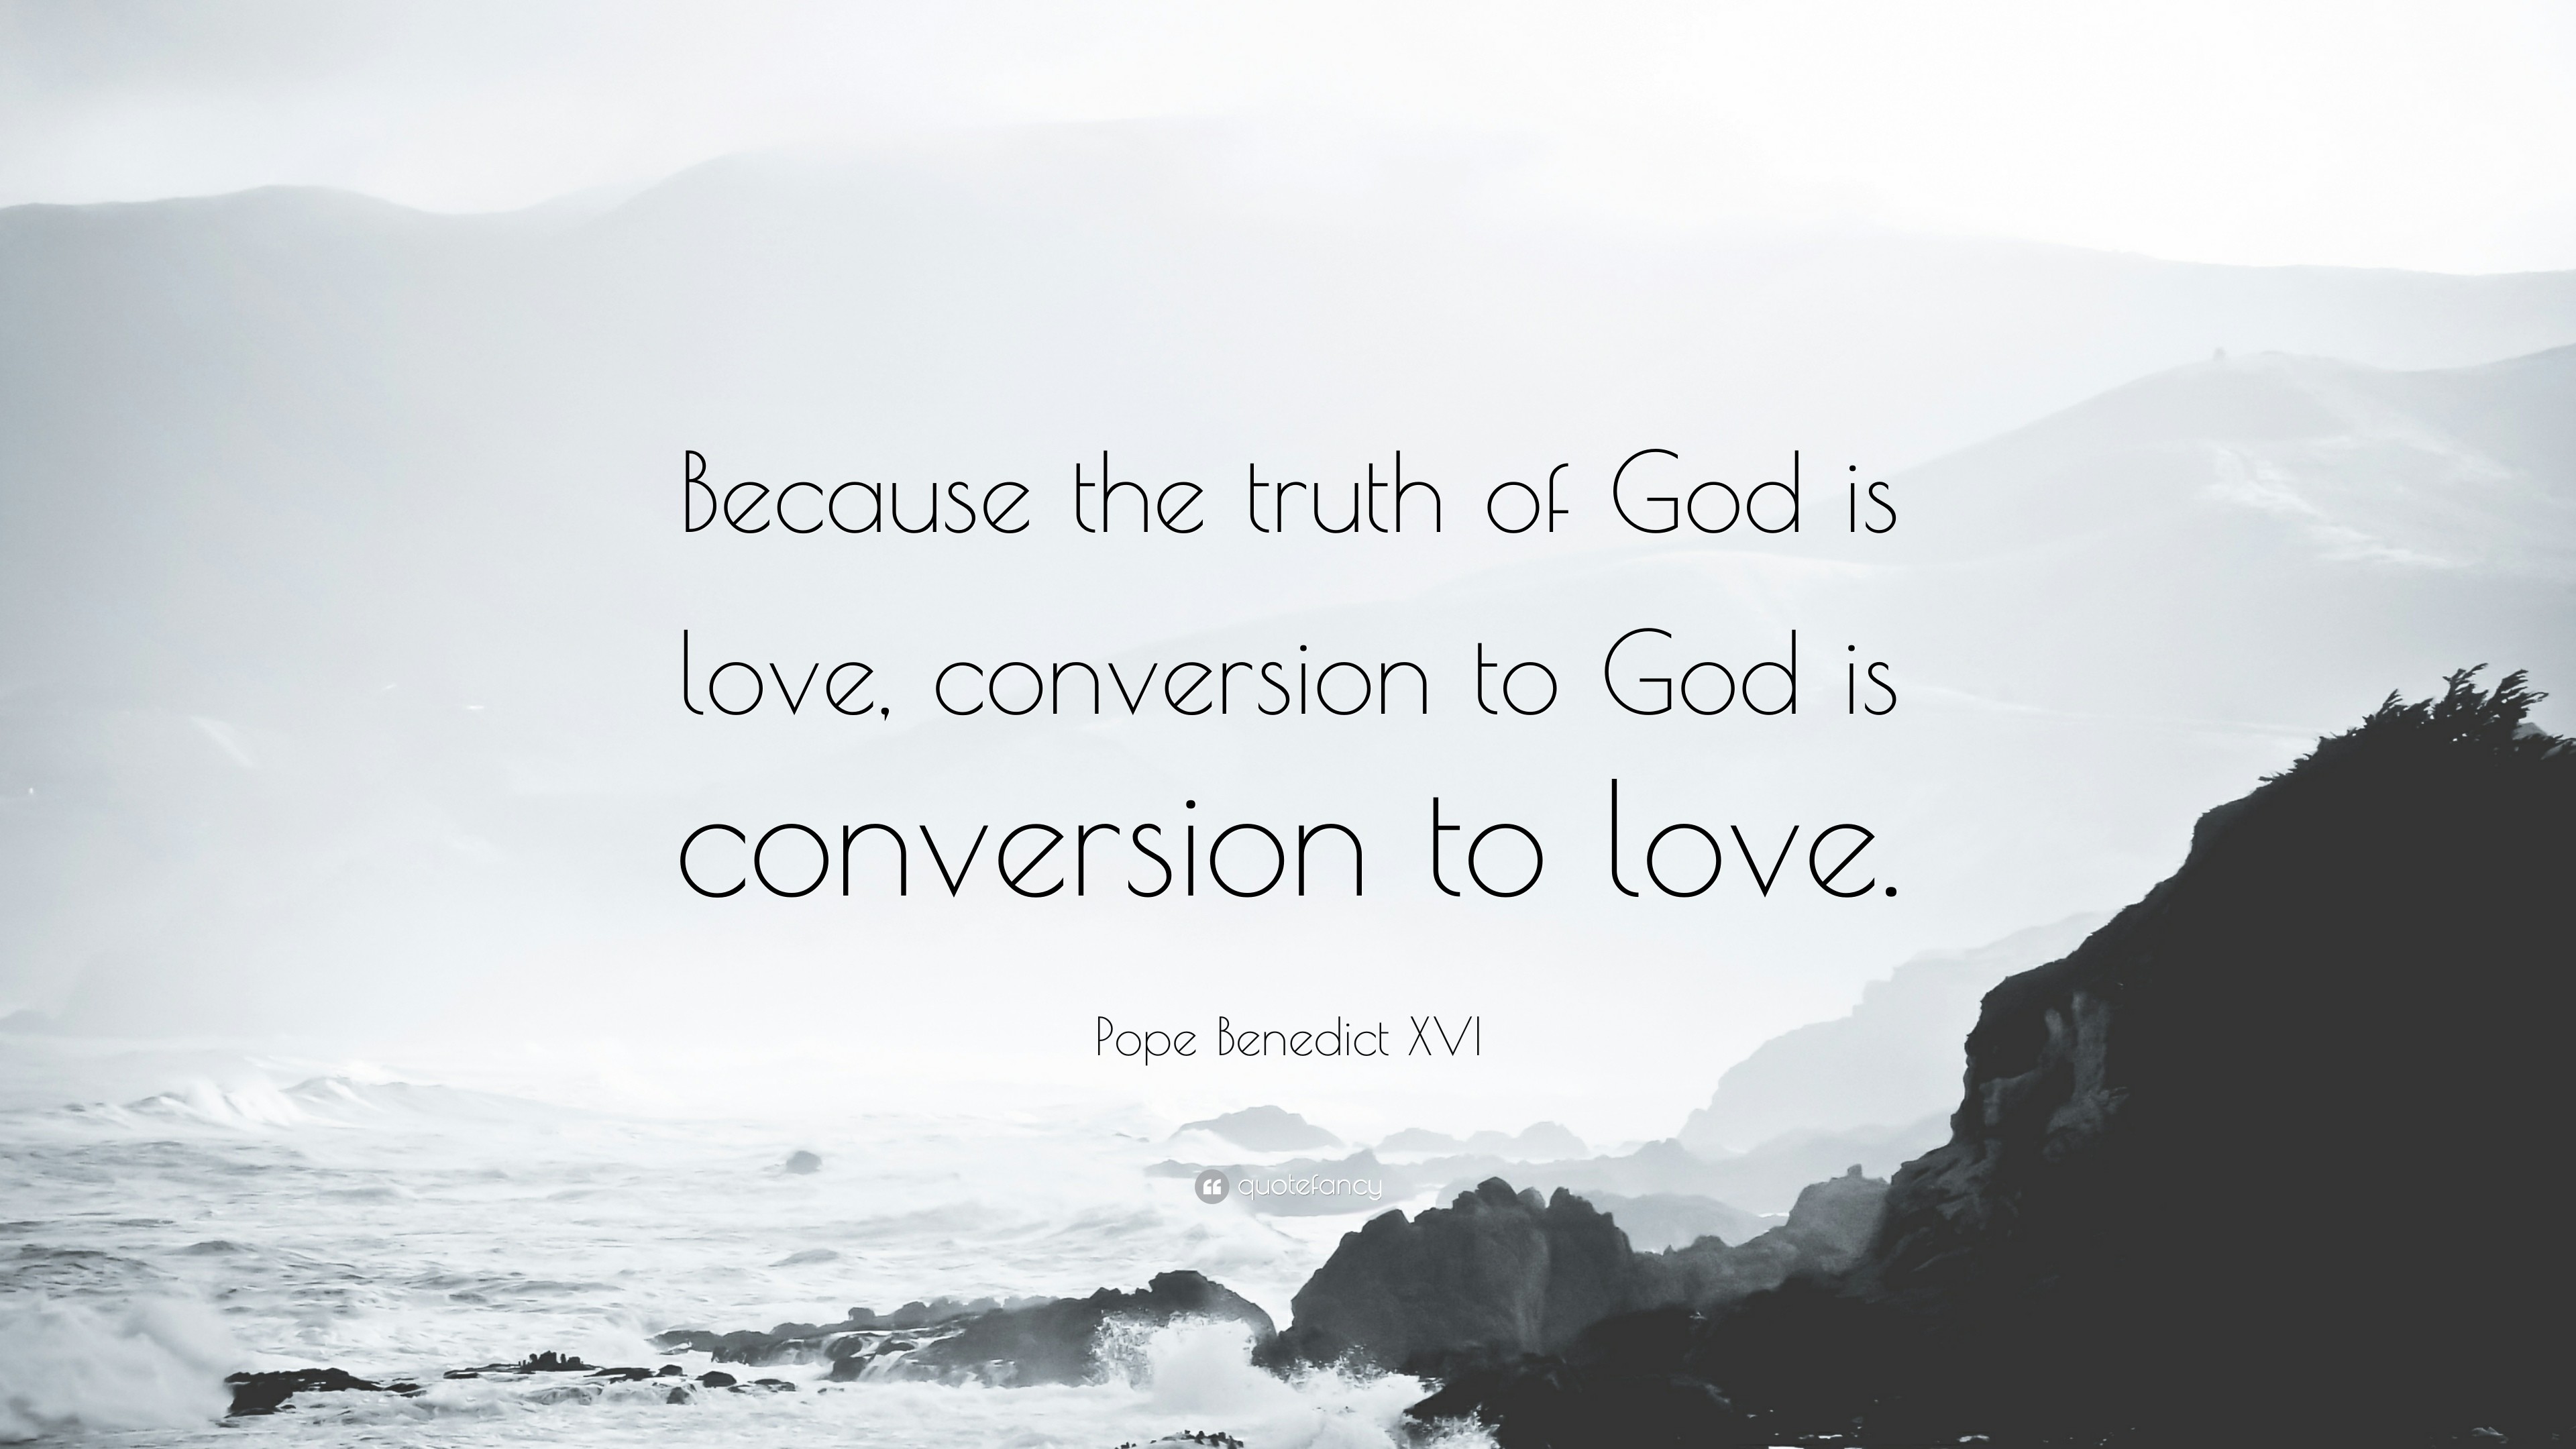 3840x2160 Pope Benedict XVI Quote: “Because the truth of God is love, conversion to